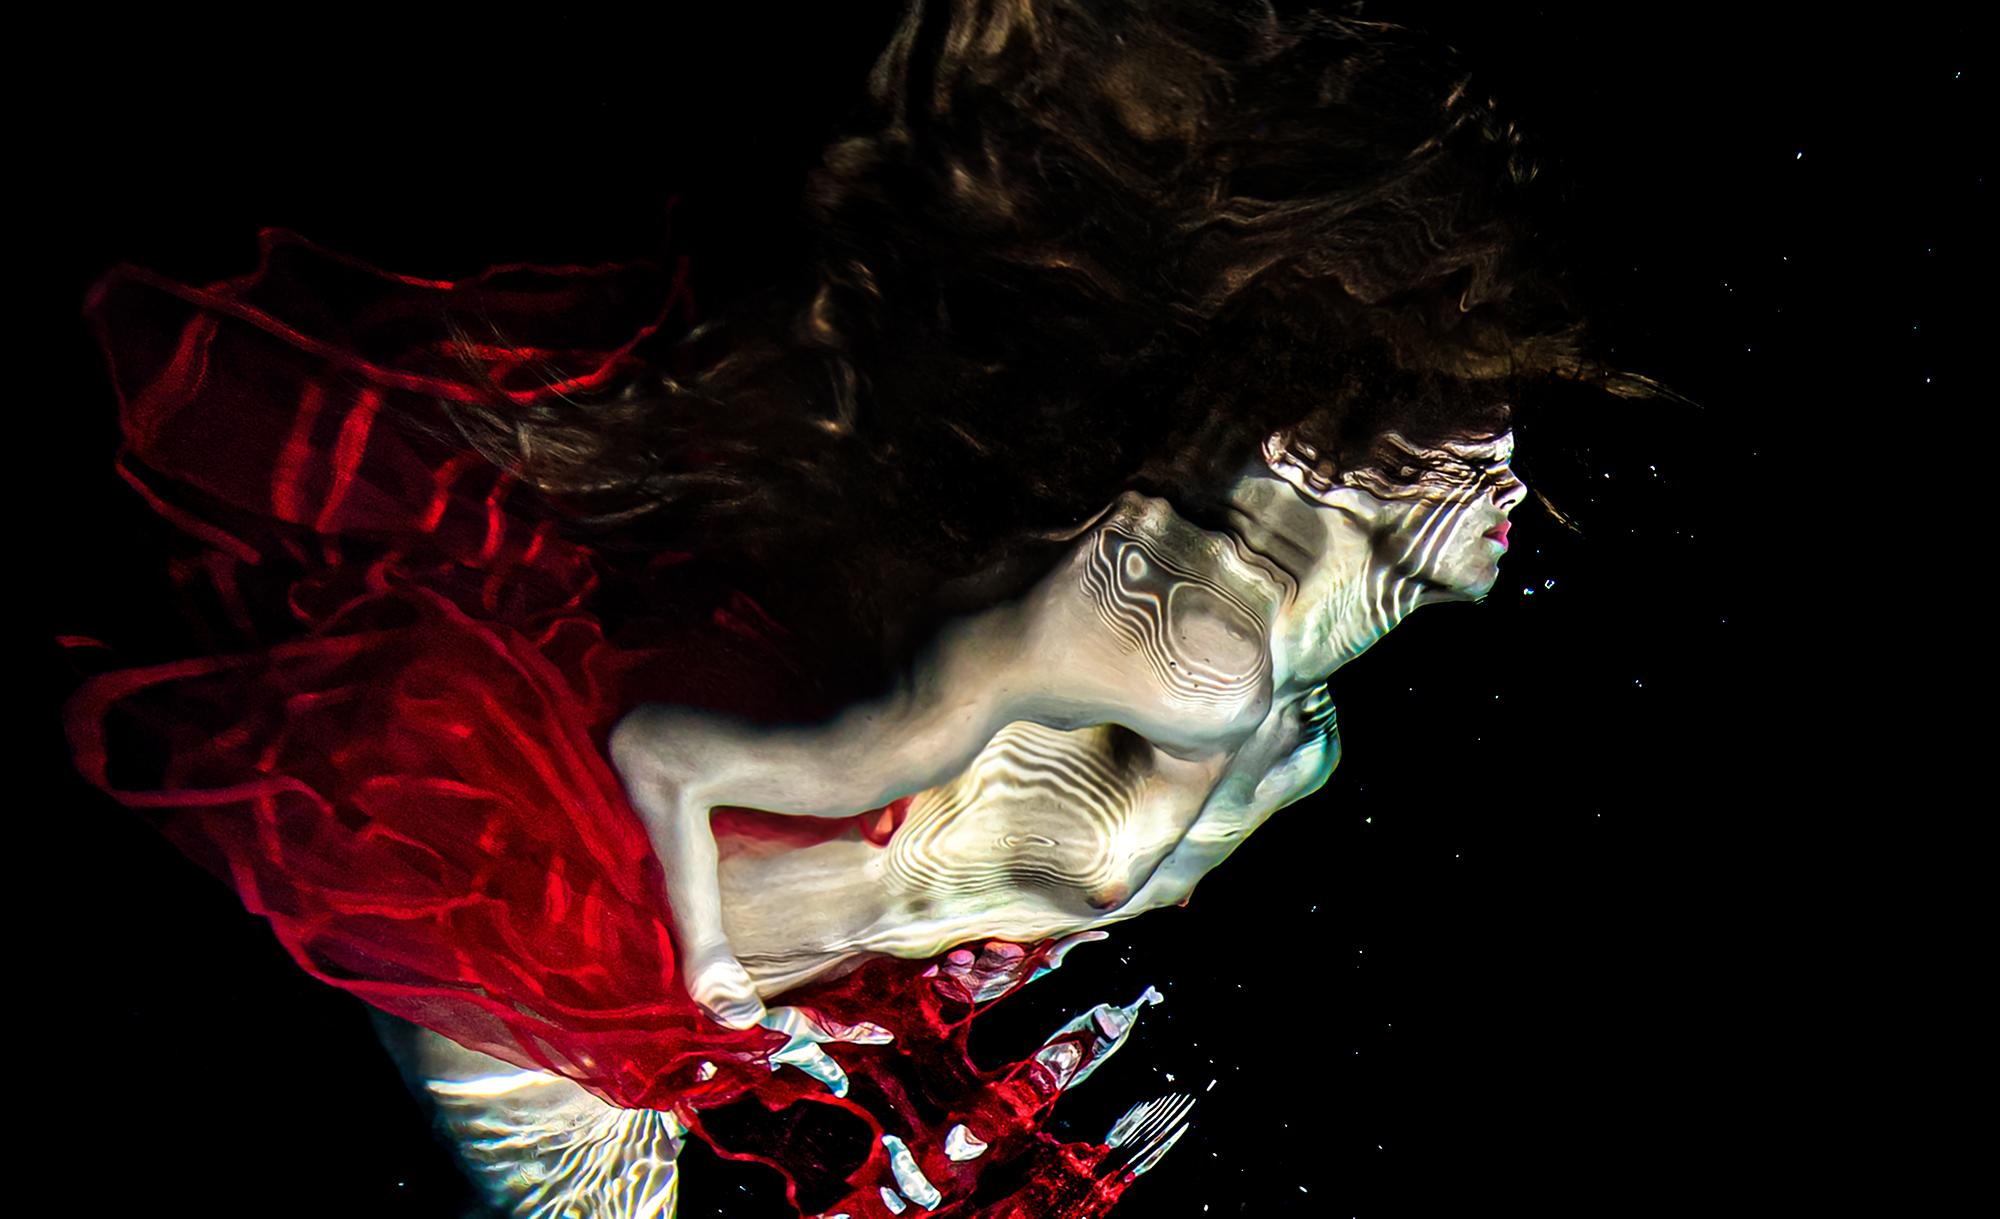 Salsa - underwater photograph from series REFLECTIONS - print on aluminum 24x36